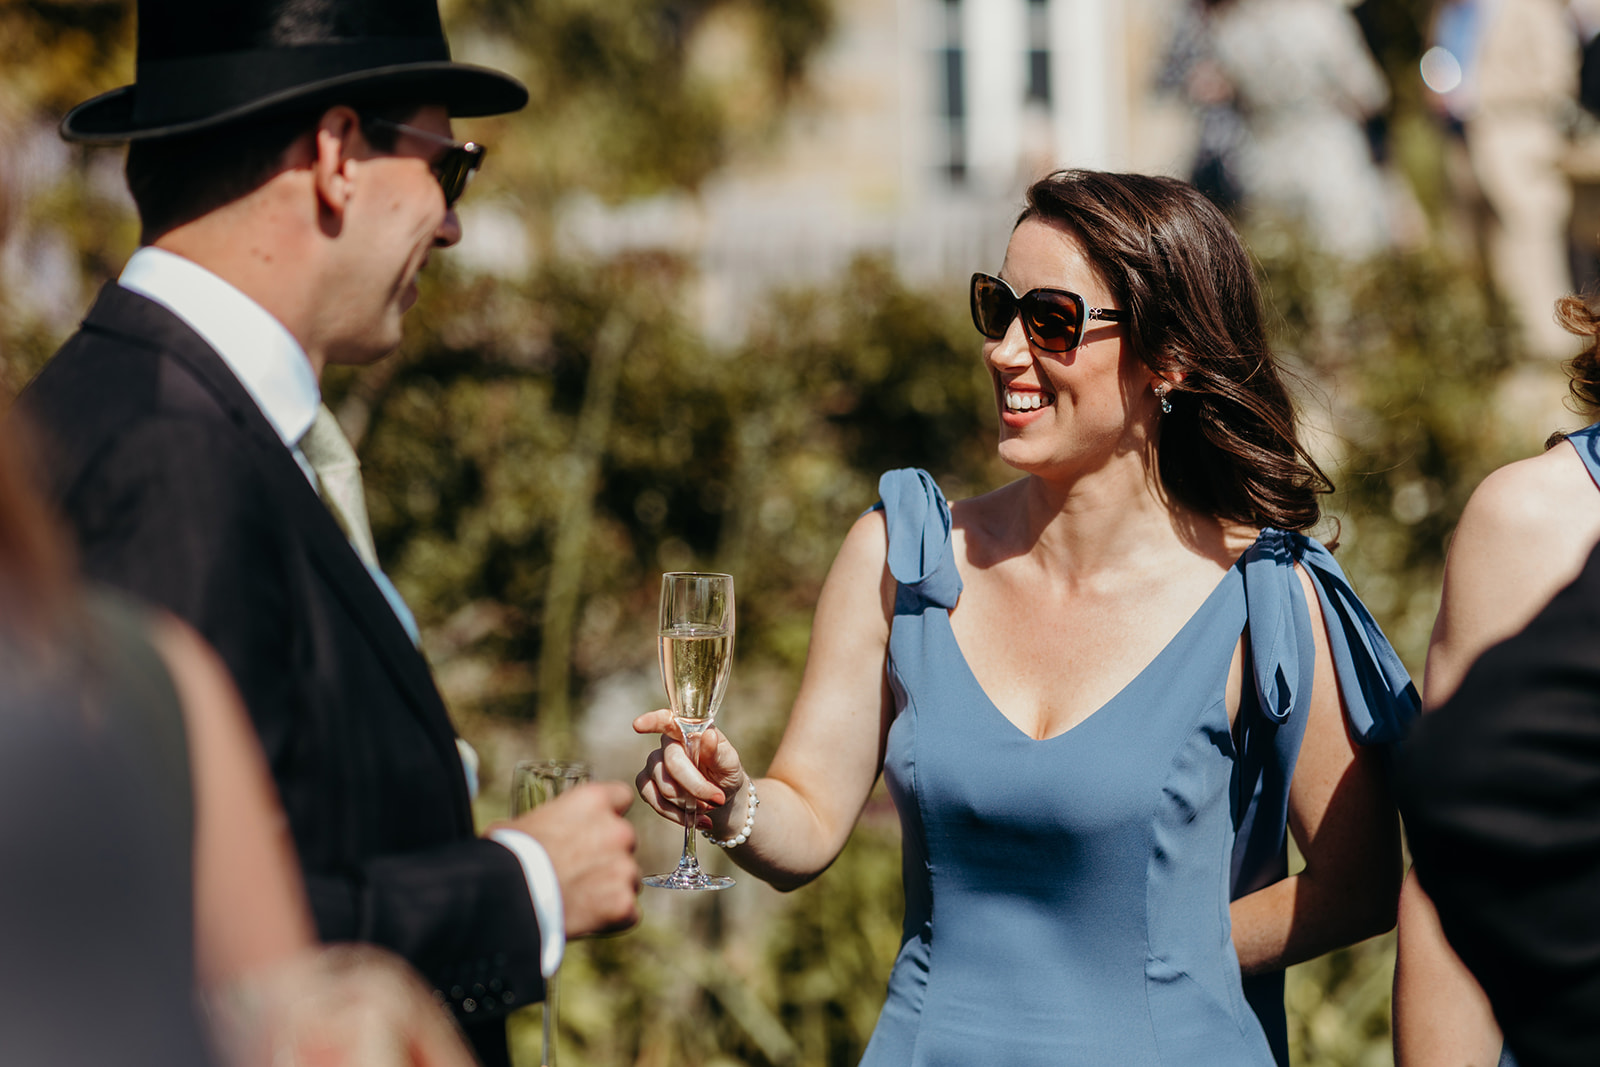 Drinks being savoured amidst laughter in the gardens of the country house wedding venue.